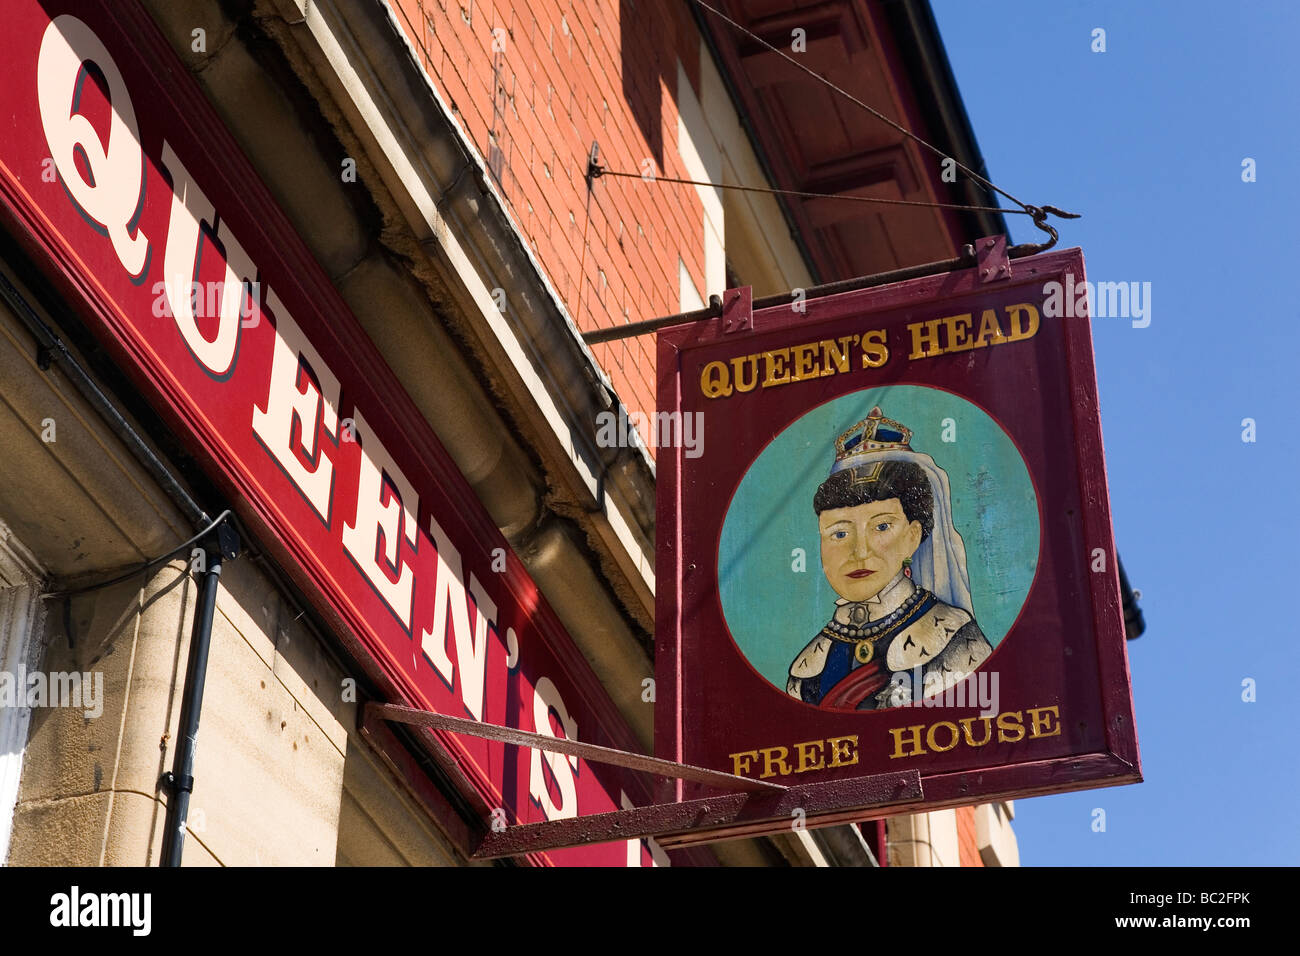 The sign for the Queen's Head public house in Newbiggin-by-the-Sea, Northumberland. Pub signs are a tradition in Britain. Stock Photo